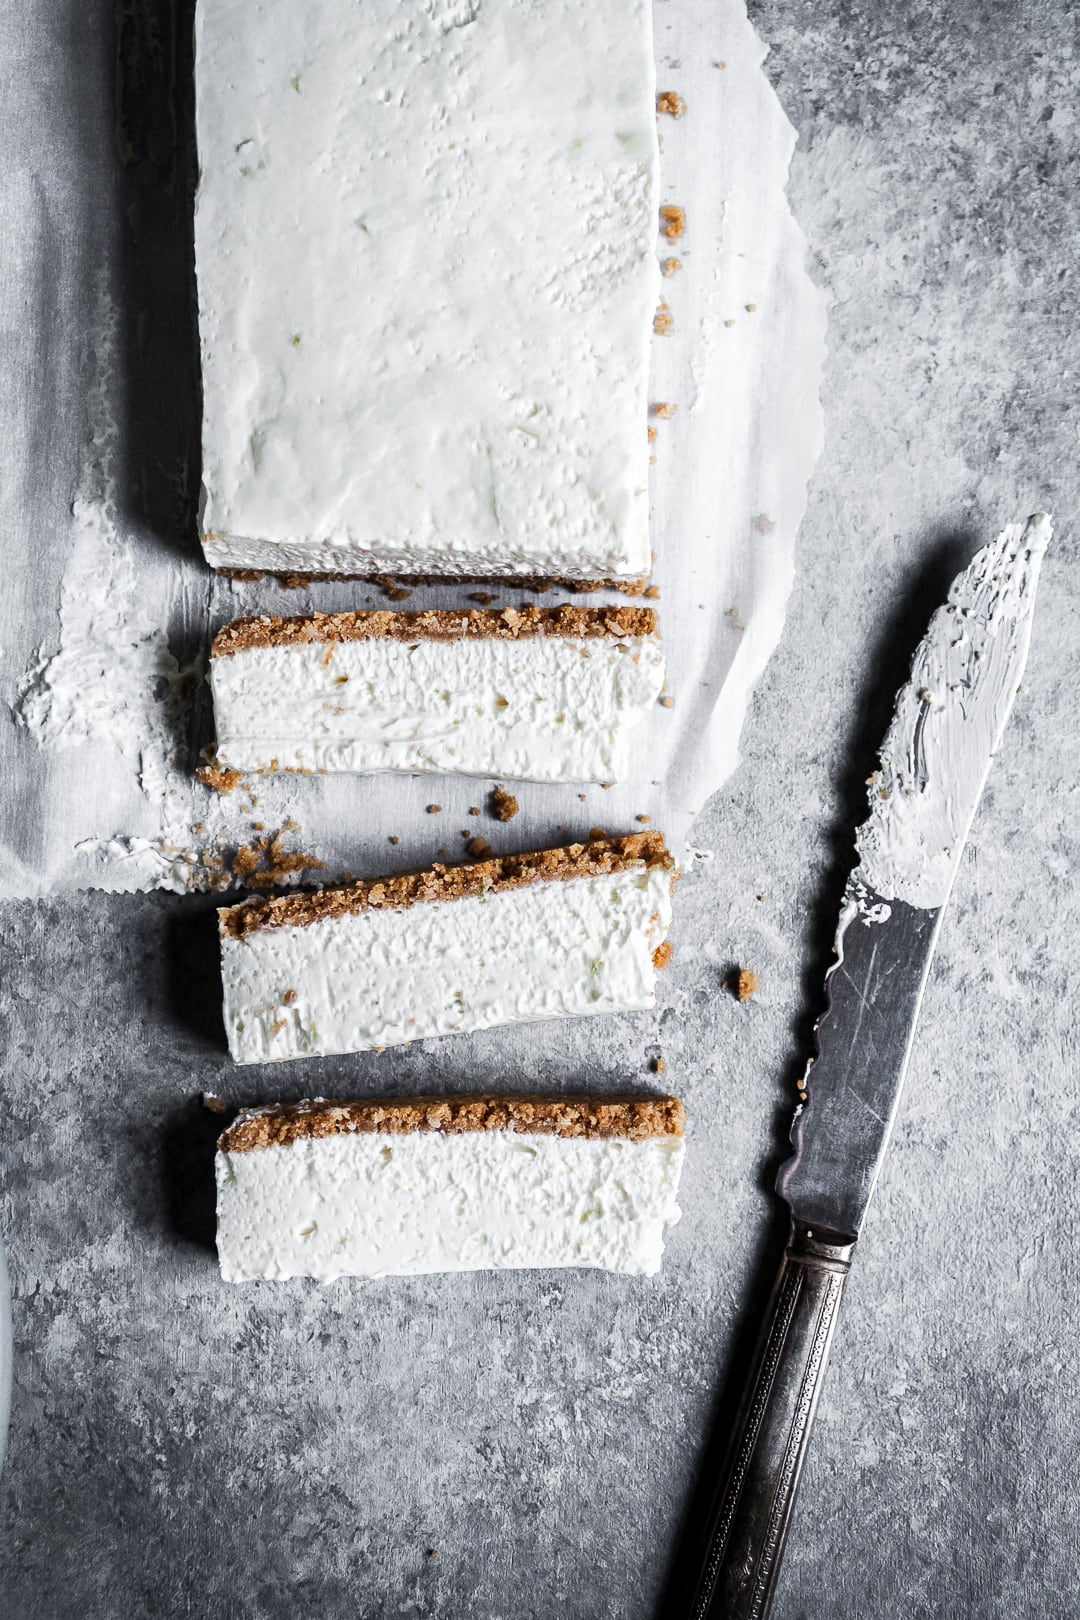 Key Lime Cheesecake Bars seen from above with three slices laying on their side next to a vintage knife on a grey background